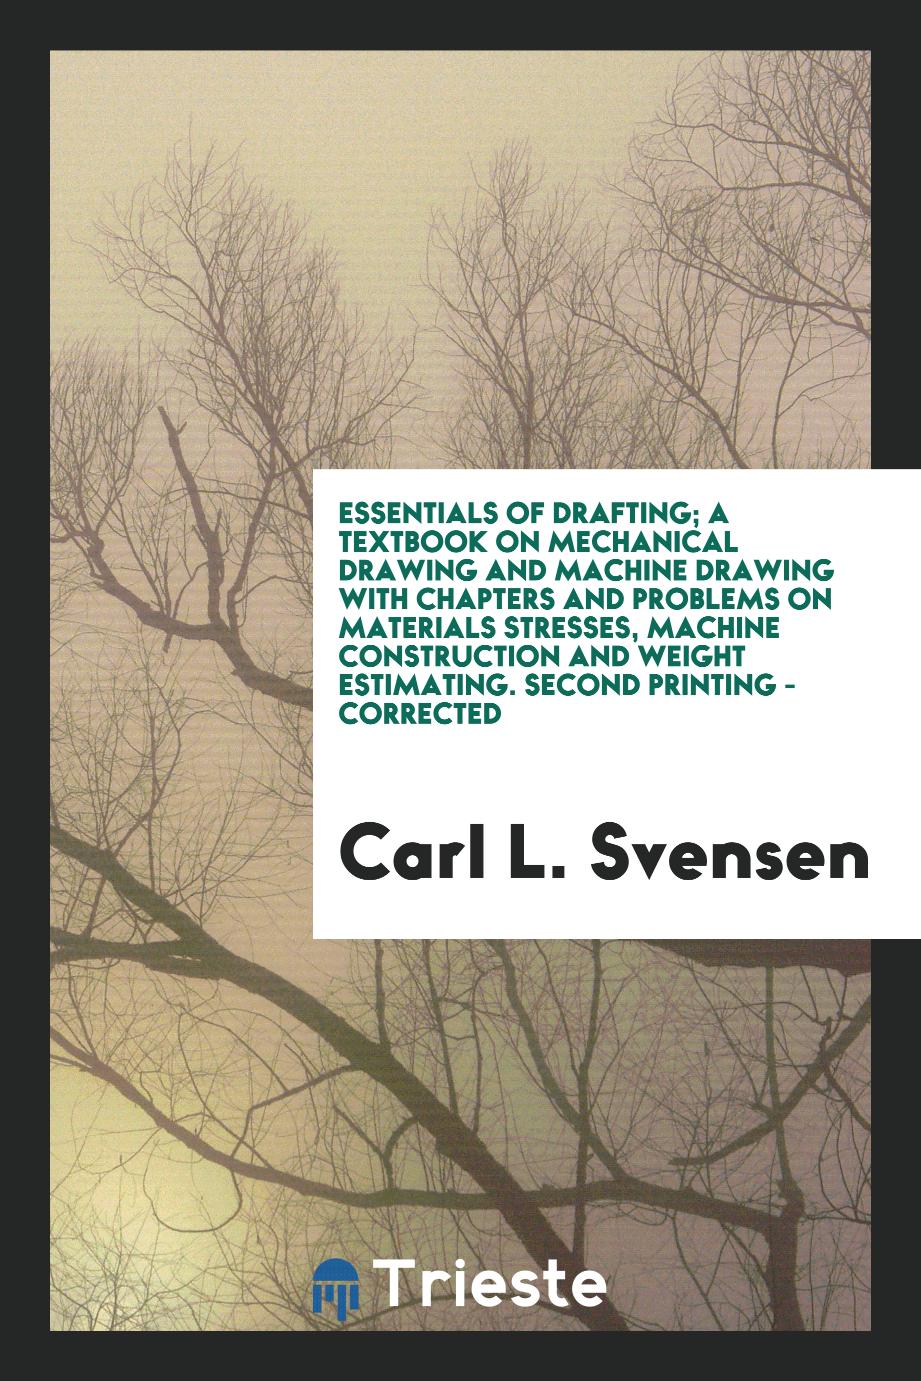 Essentials of Drafting; A Textbook on Mechanical Drawing and Machine Drawing with Chapters and Problems on Materials Stresses, Machine Construction and Weight Estimating. Second Printing - Corrected